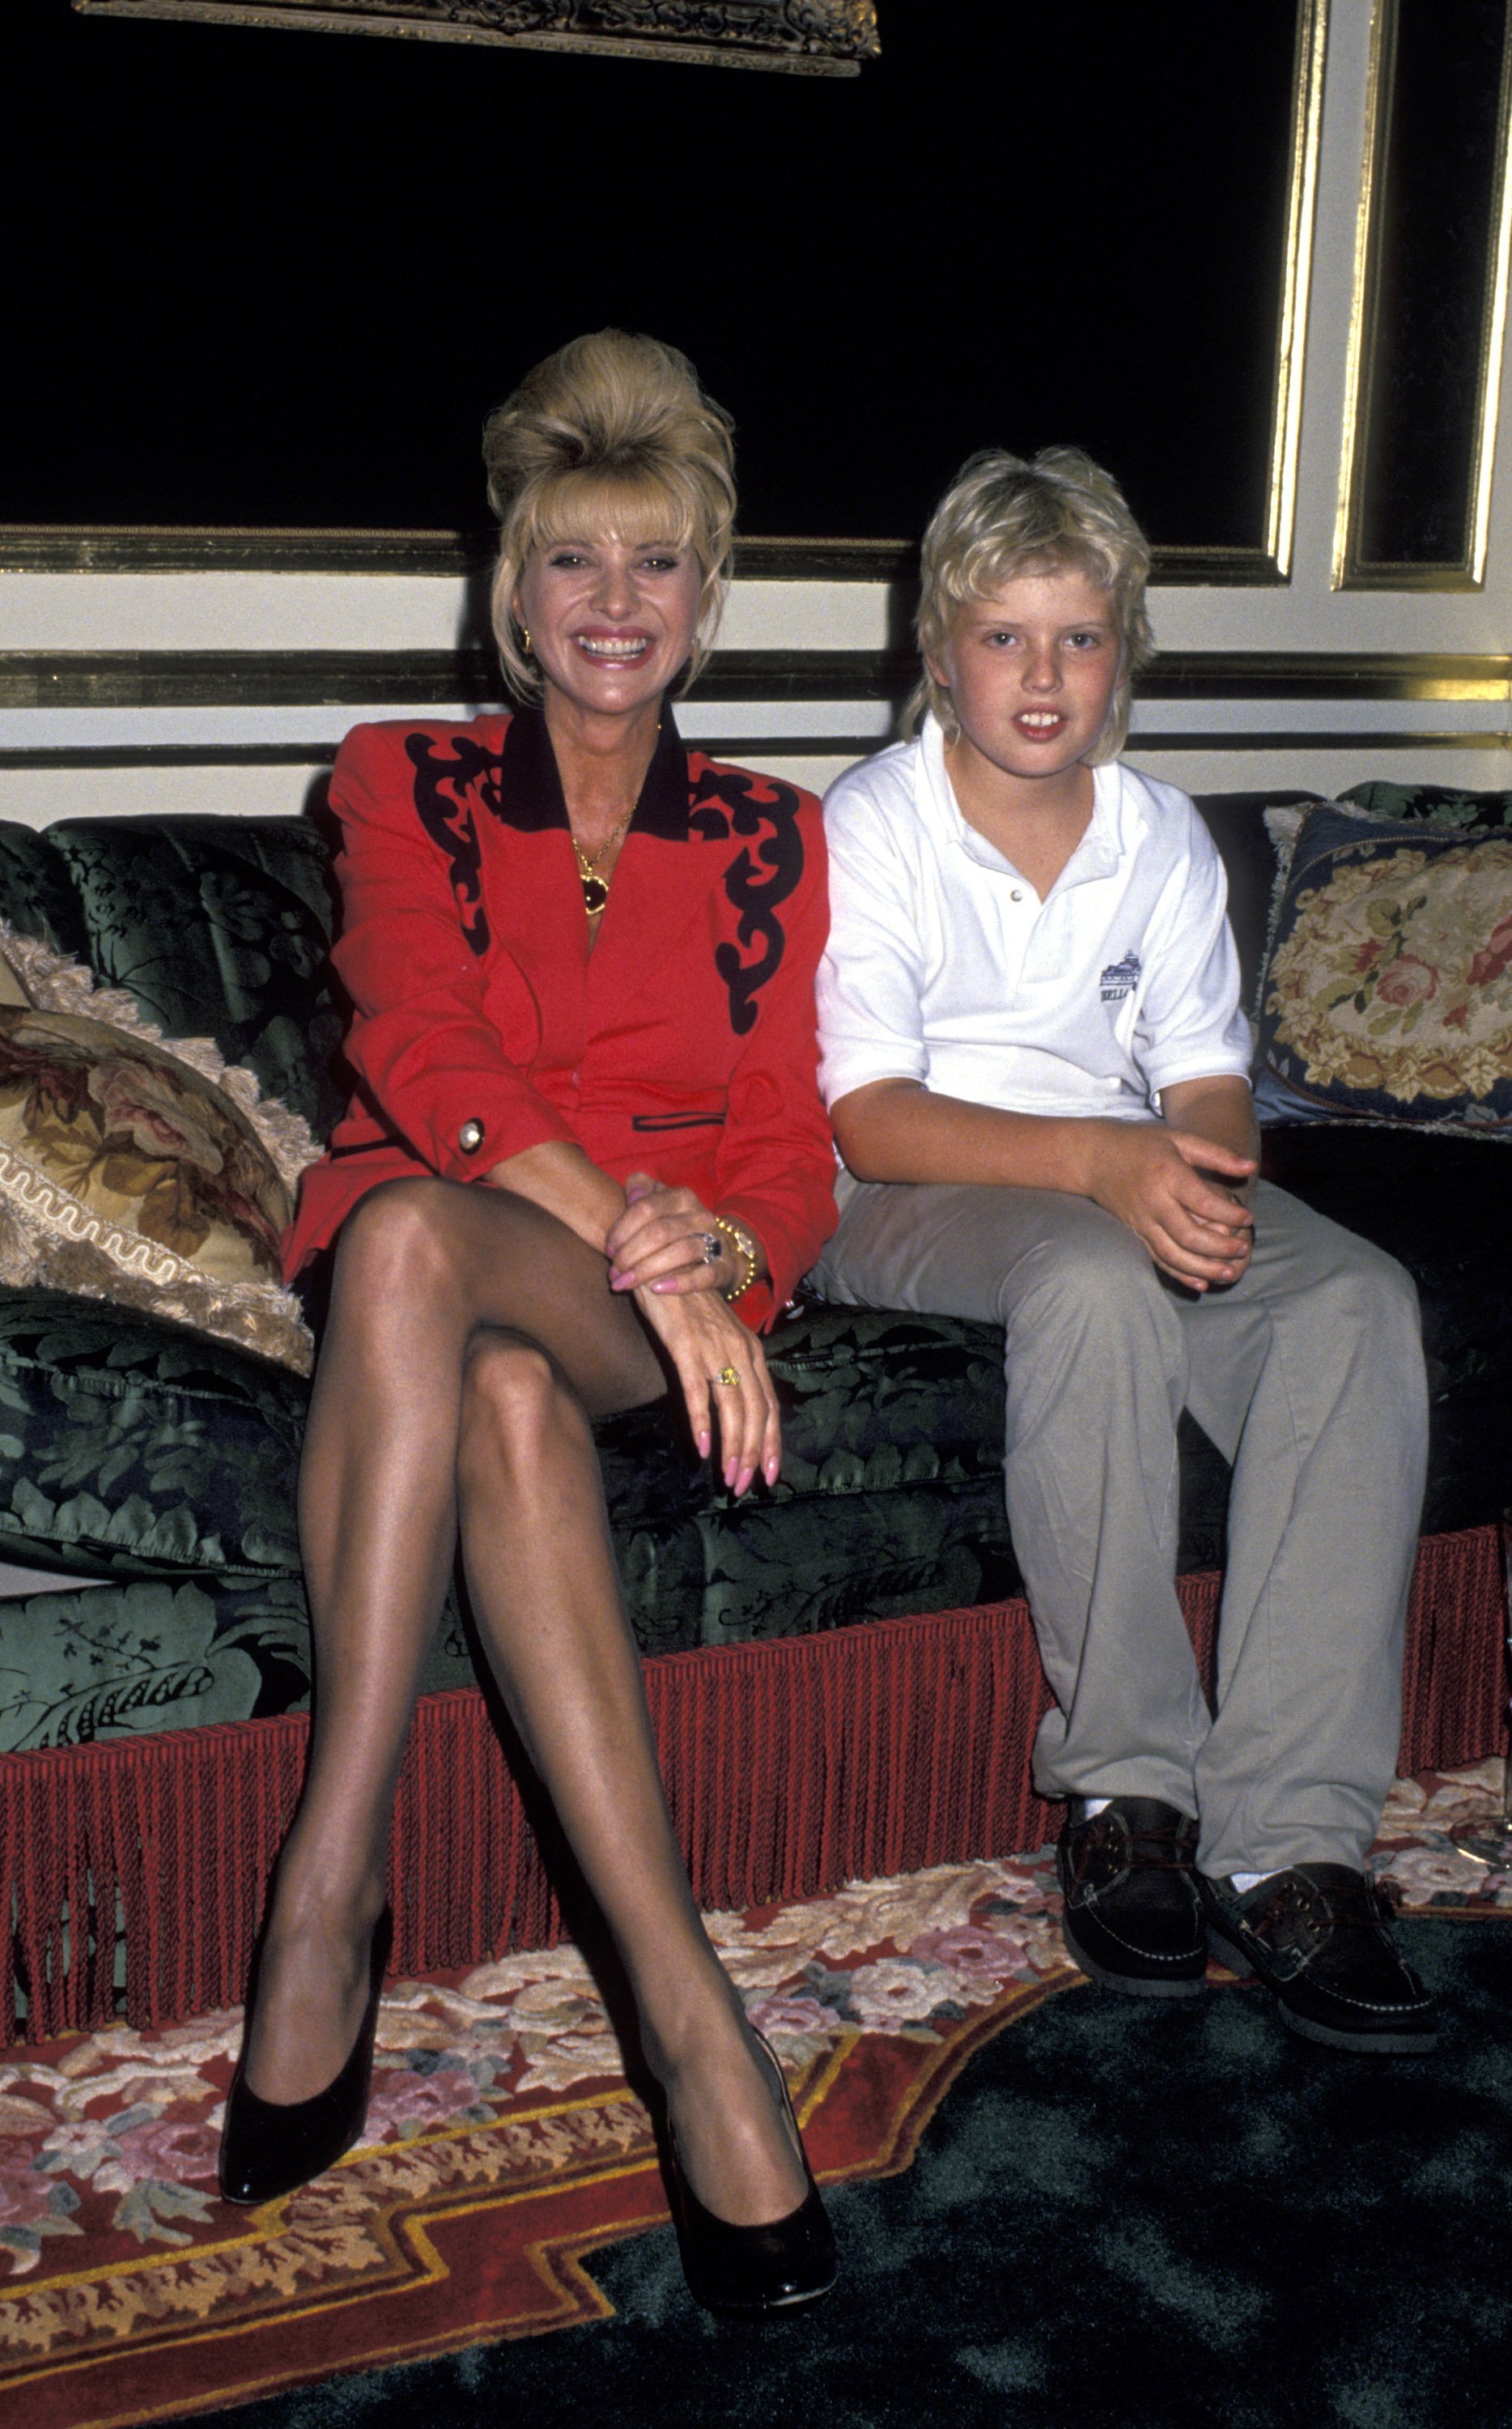 Author Ivana Trump's house during Exclusive Photo Shoot with Ivana Trump at Ivana's townhouse on September 27, 1994 in New York City, New York.┃Source: Getty Images